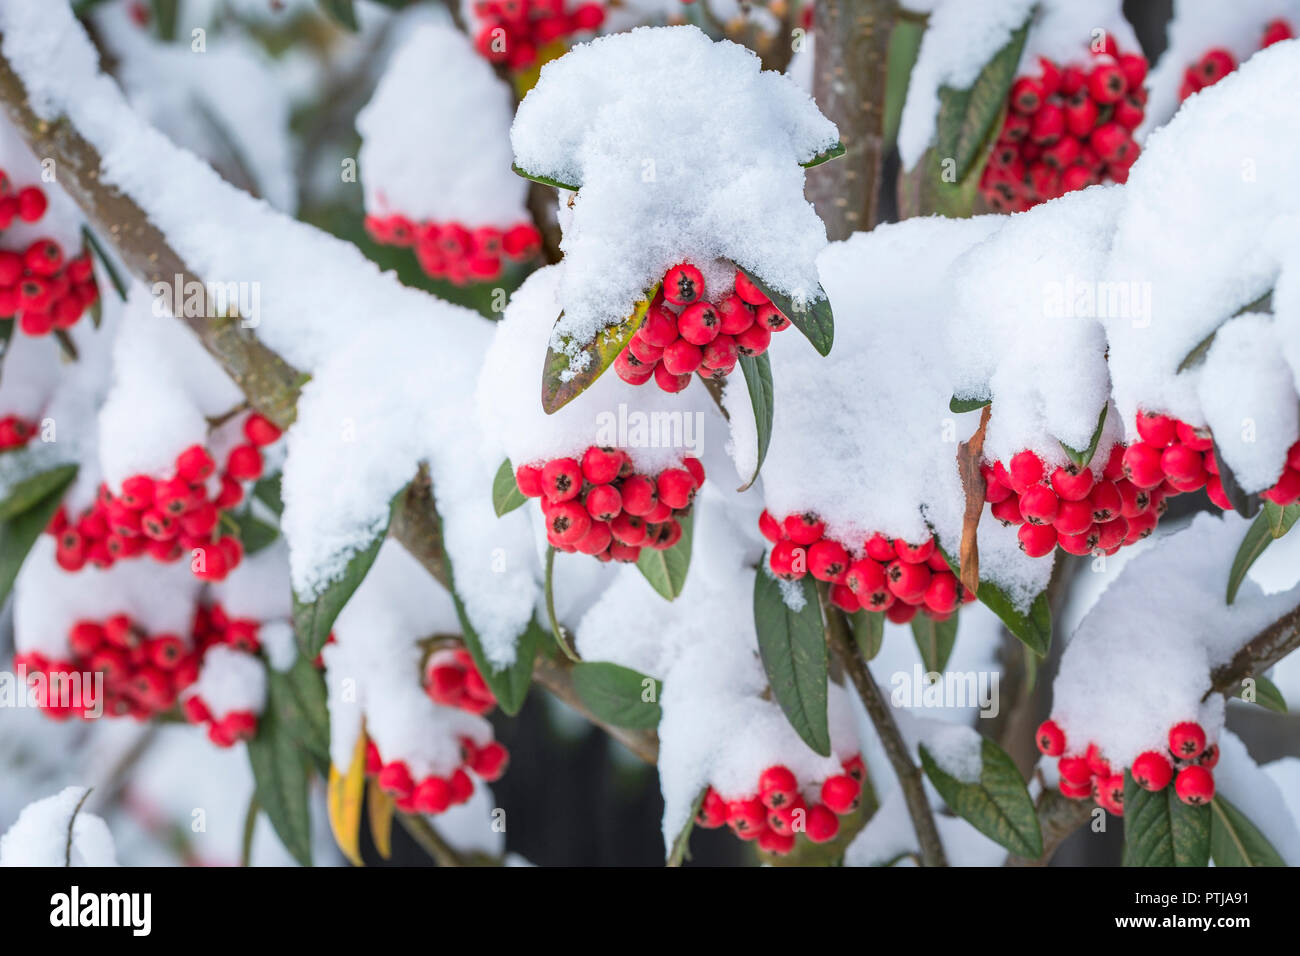 Red berries of Cotoneaster seen after a heavy snowfall. Stock Photo